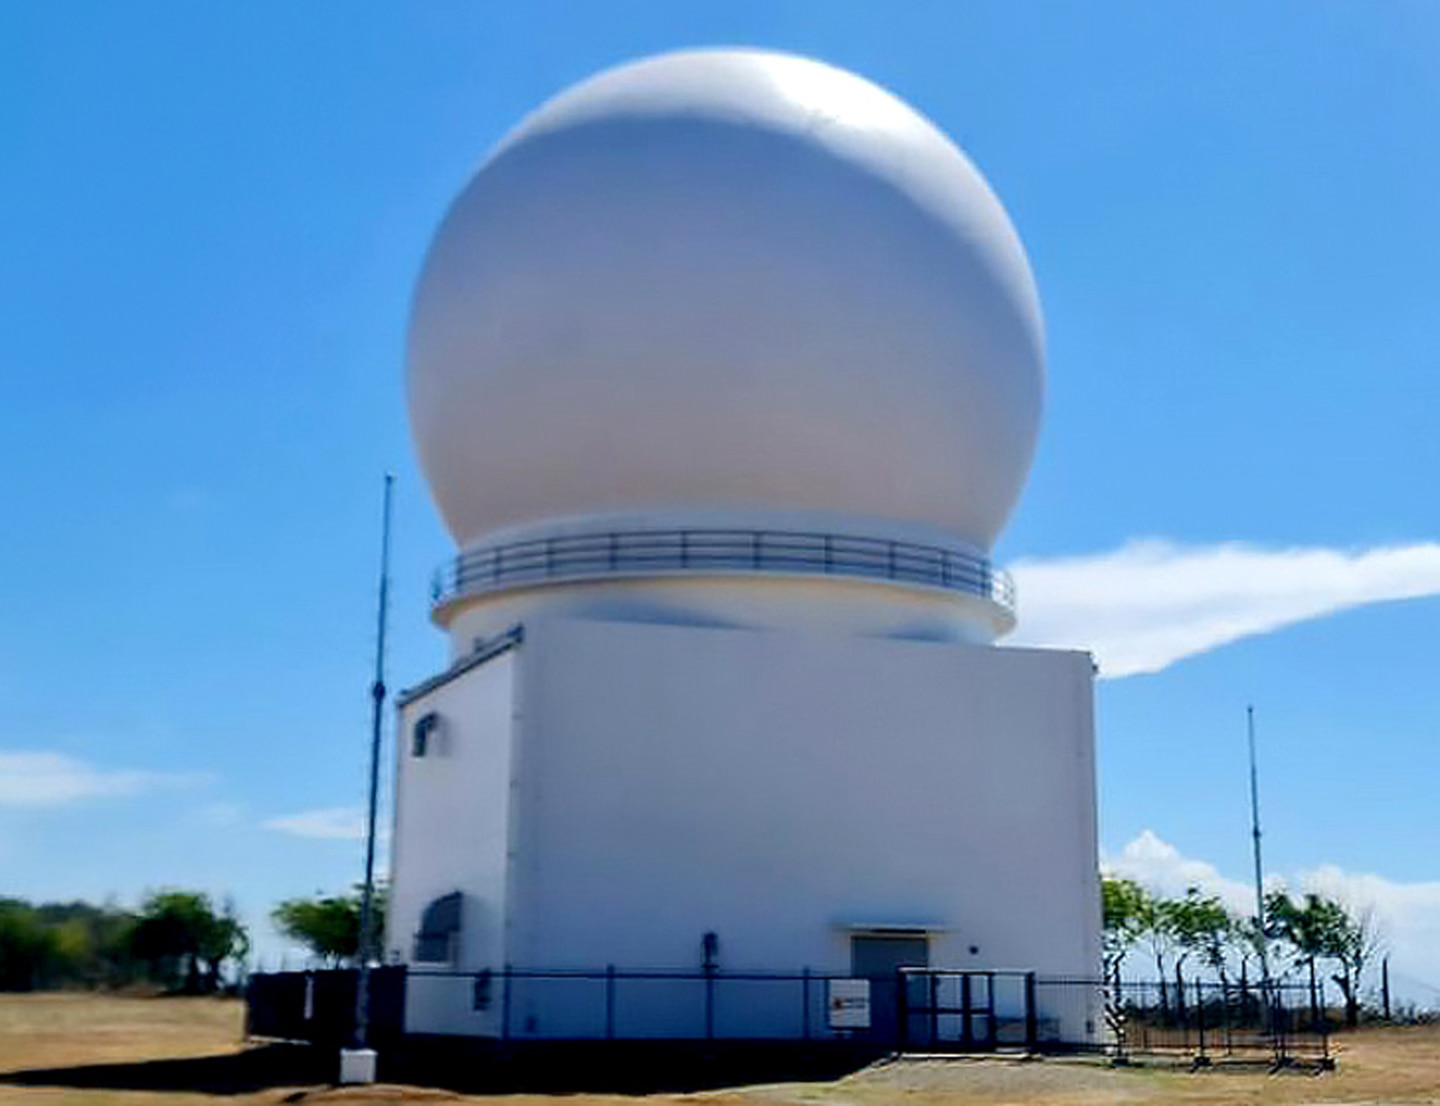 The first unit of air-surveillance radar system delivered to the Philippines